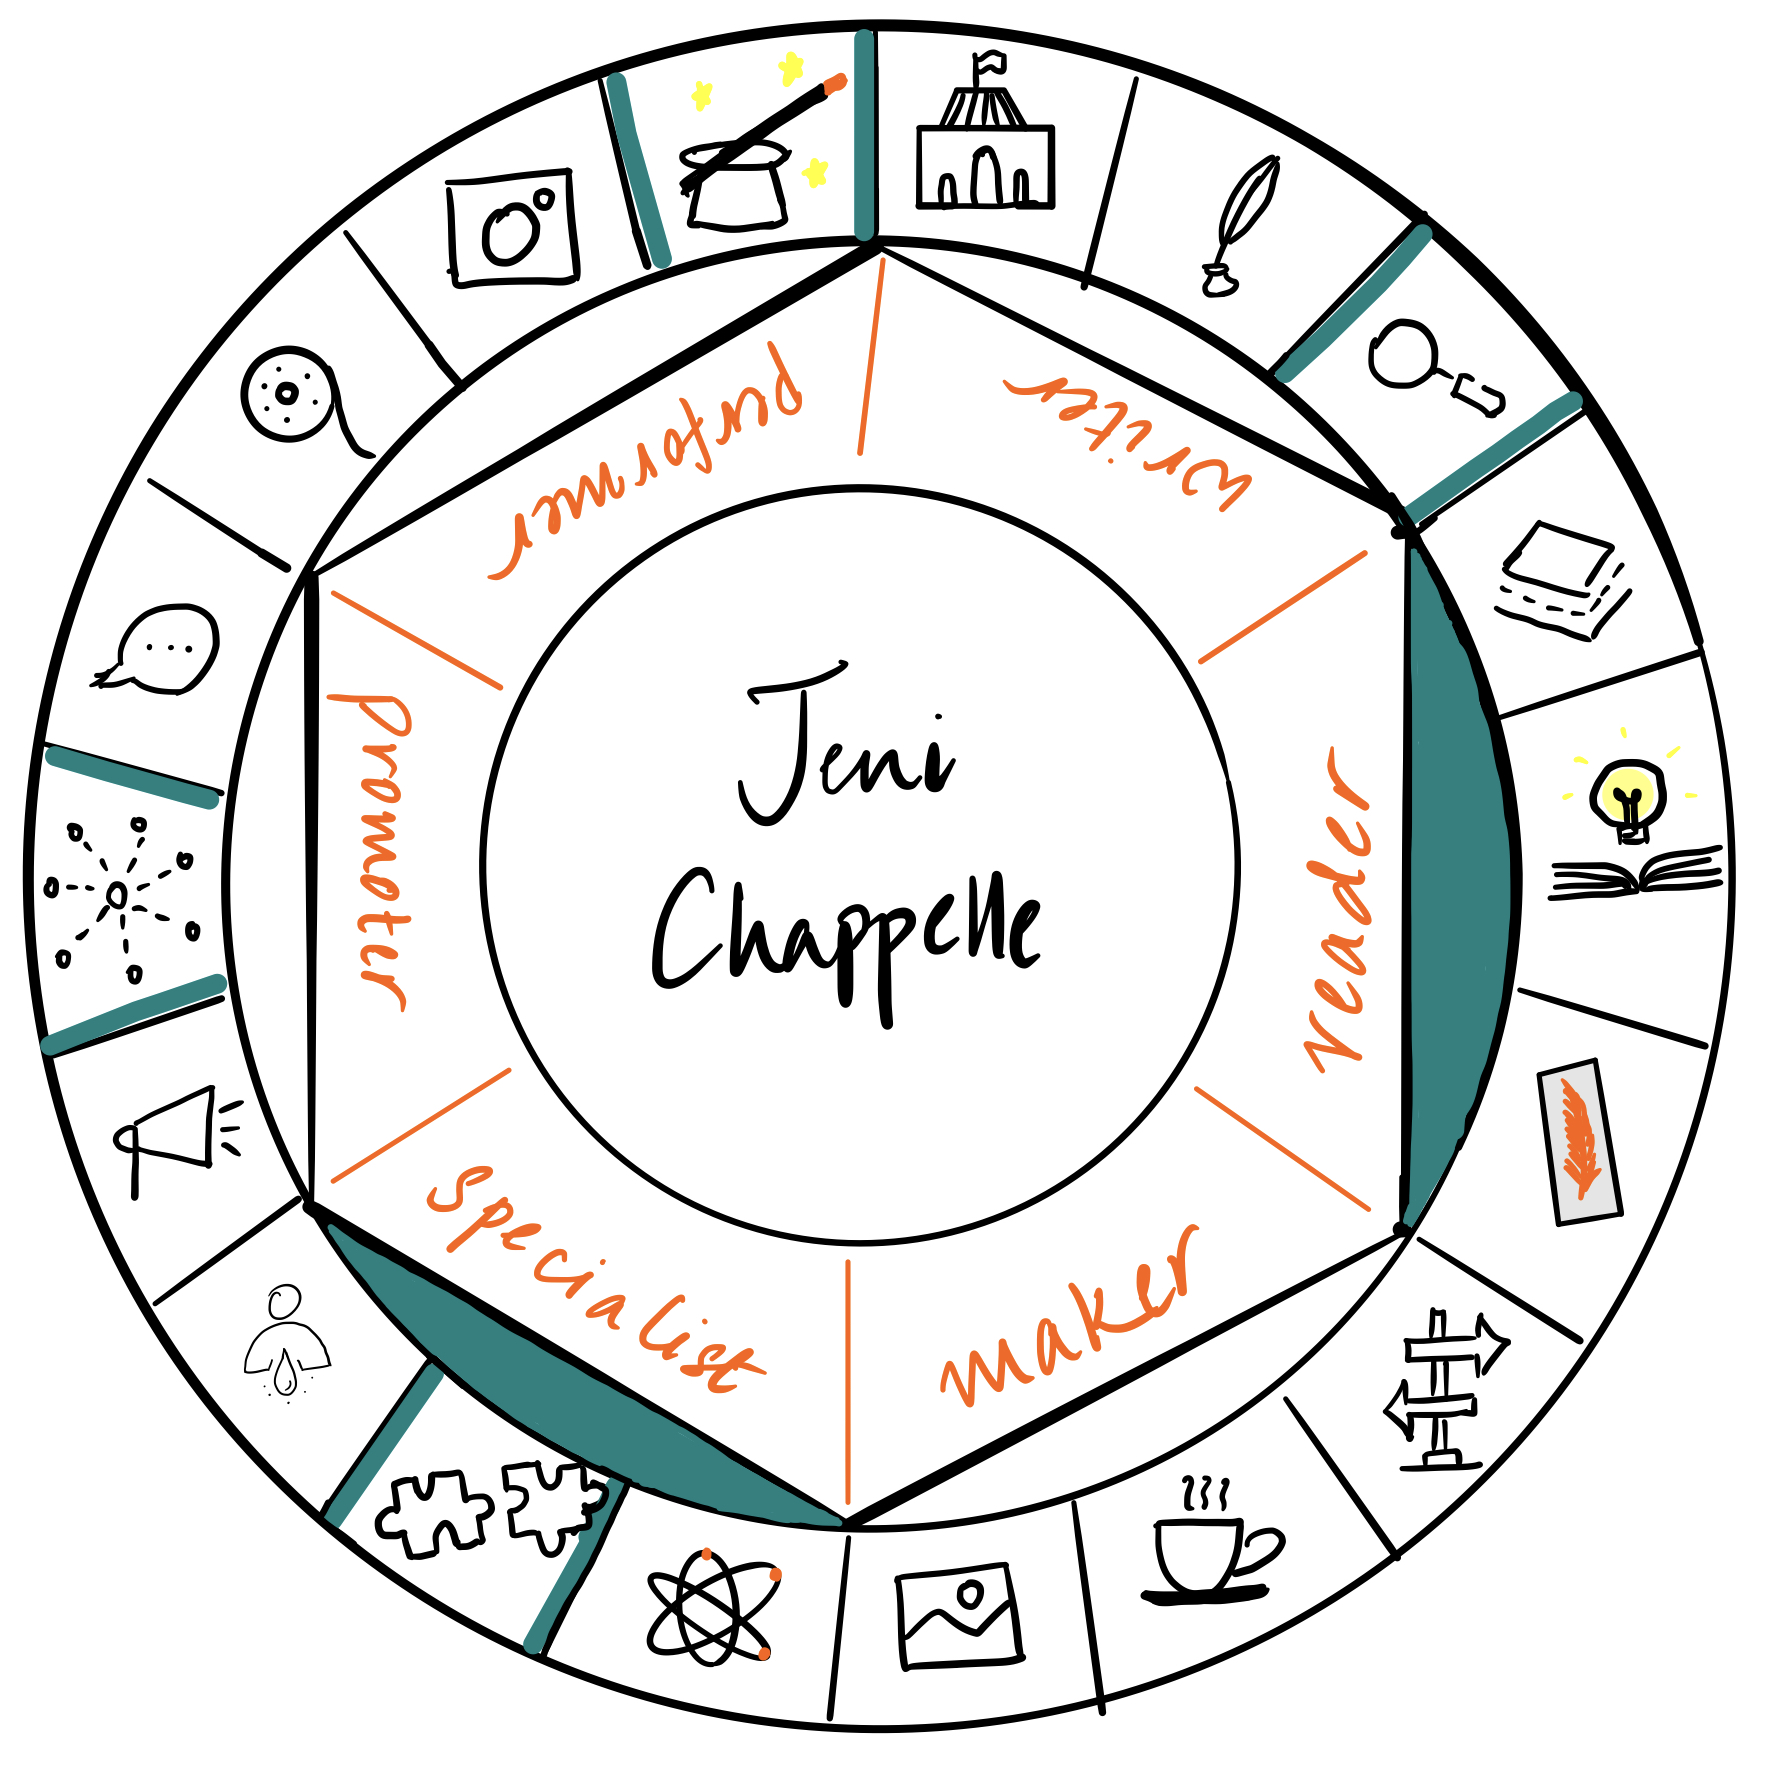 Jeni Chappelle is a reader and specialist. It's a pleasure to have her over on The Creator's Roulette to talk about being an editor and editing.